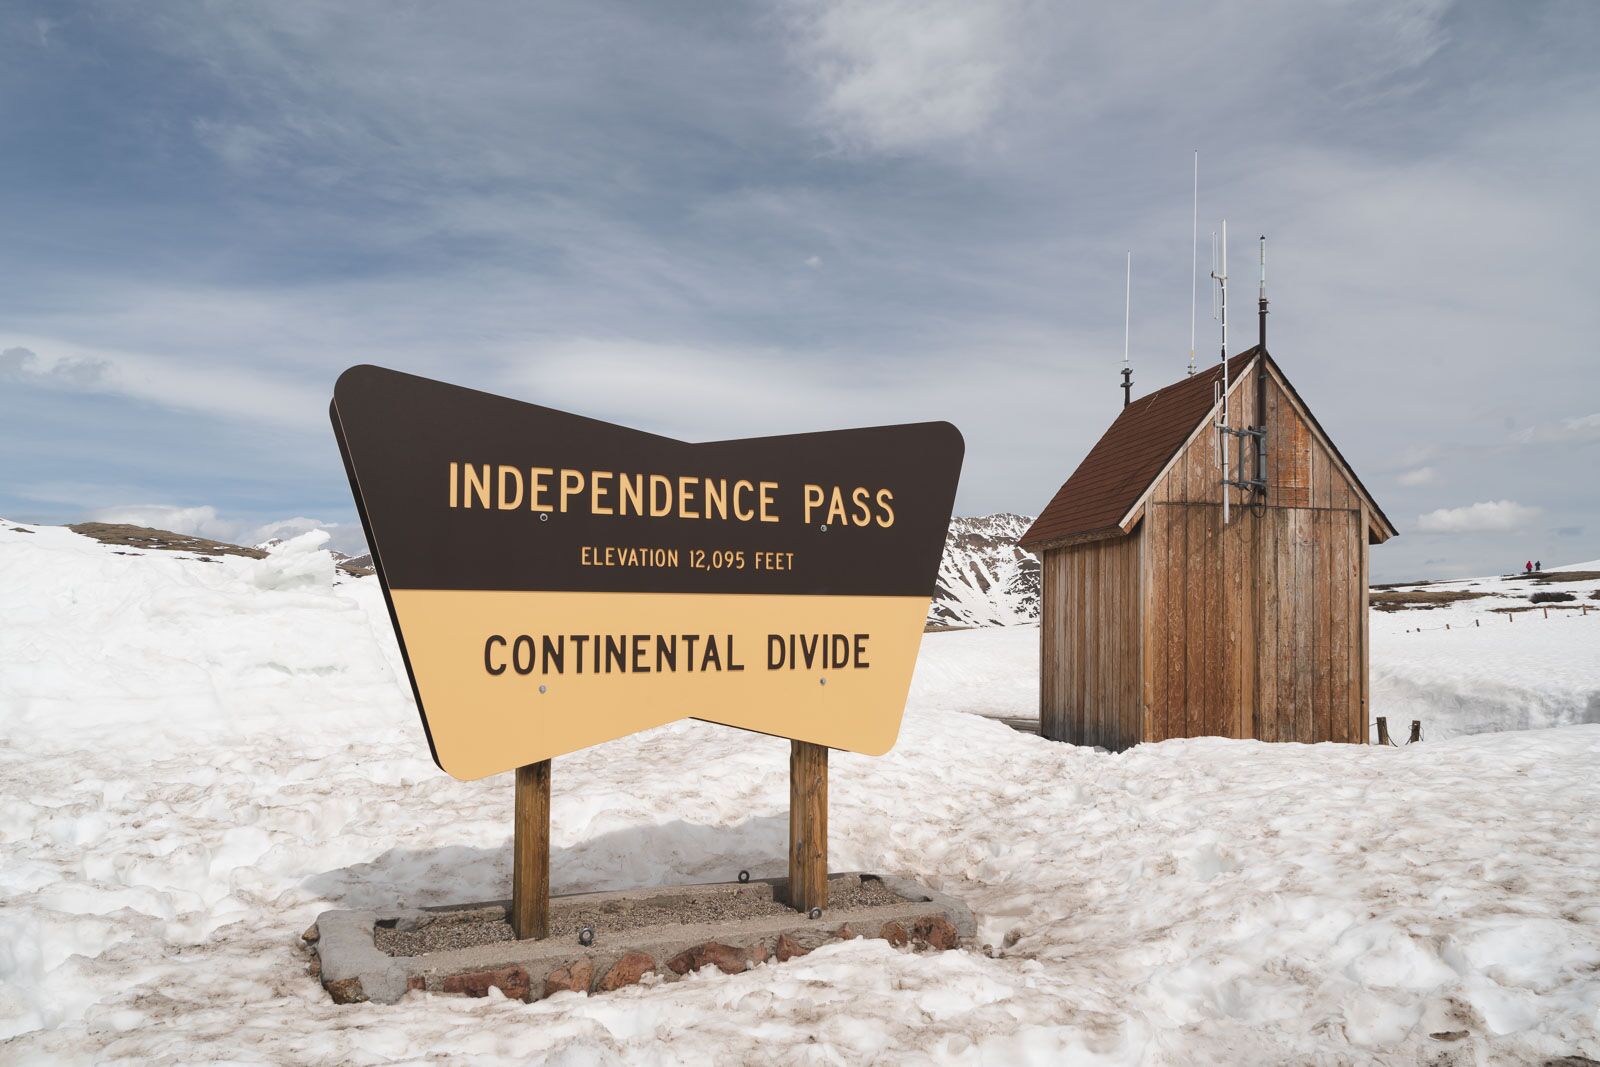 things to do in aspen colorado Independence Pass